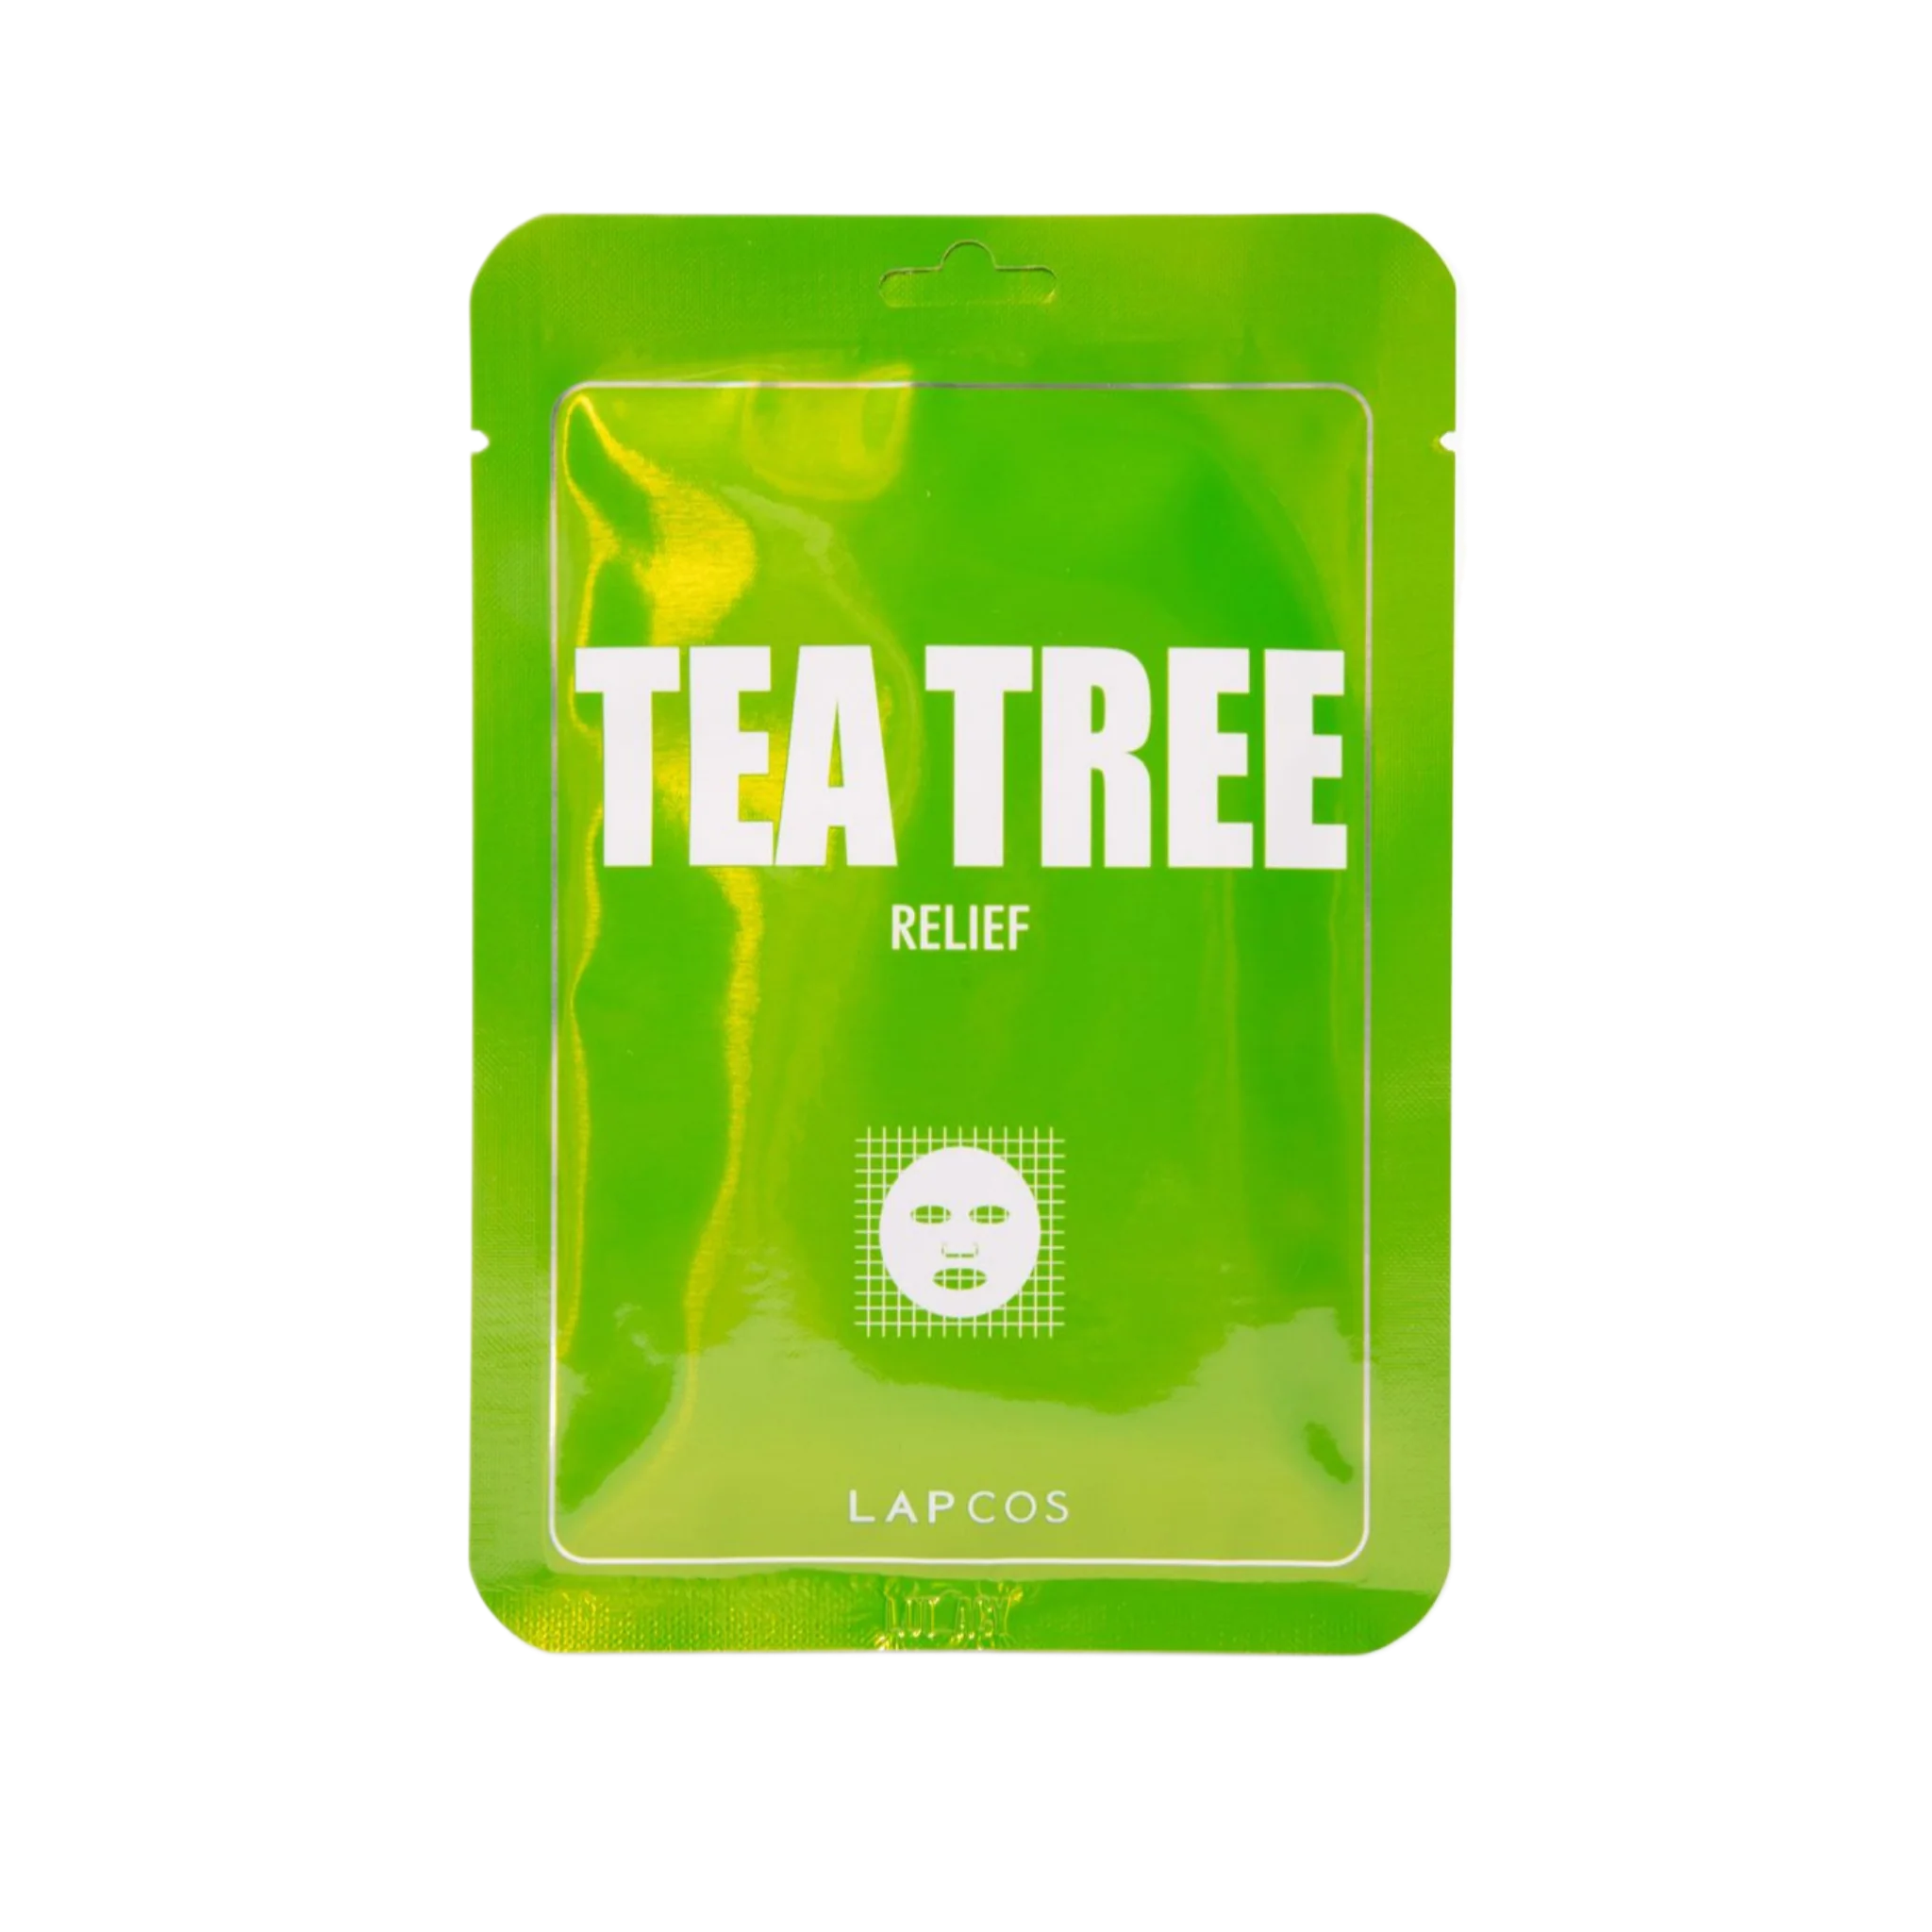 Load image into Gallery viewer, LAPCOS Tea Tree Derma Sheet Mask
